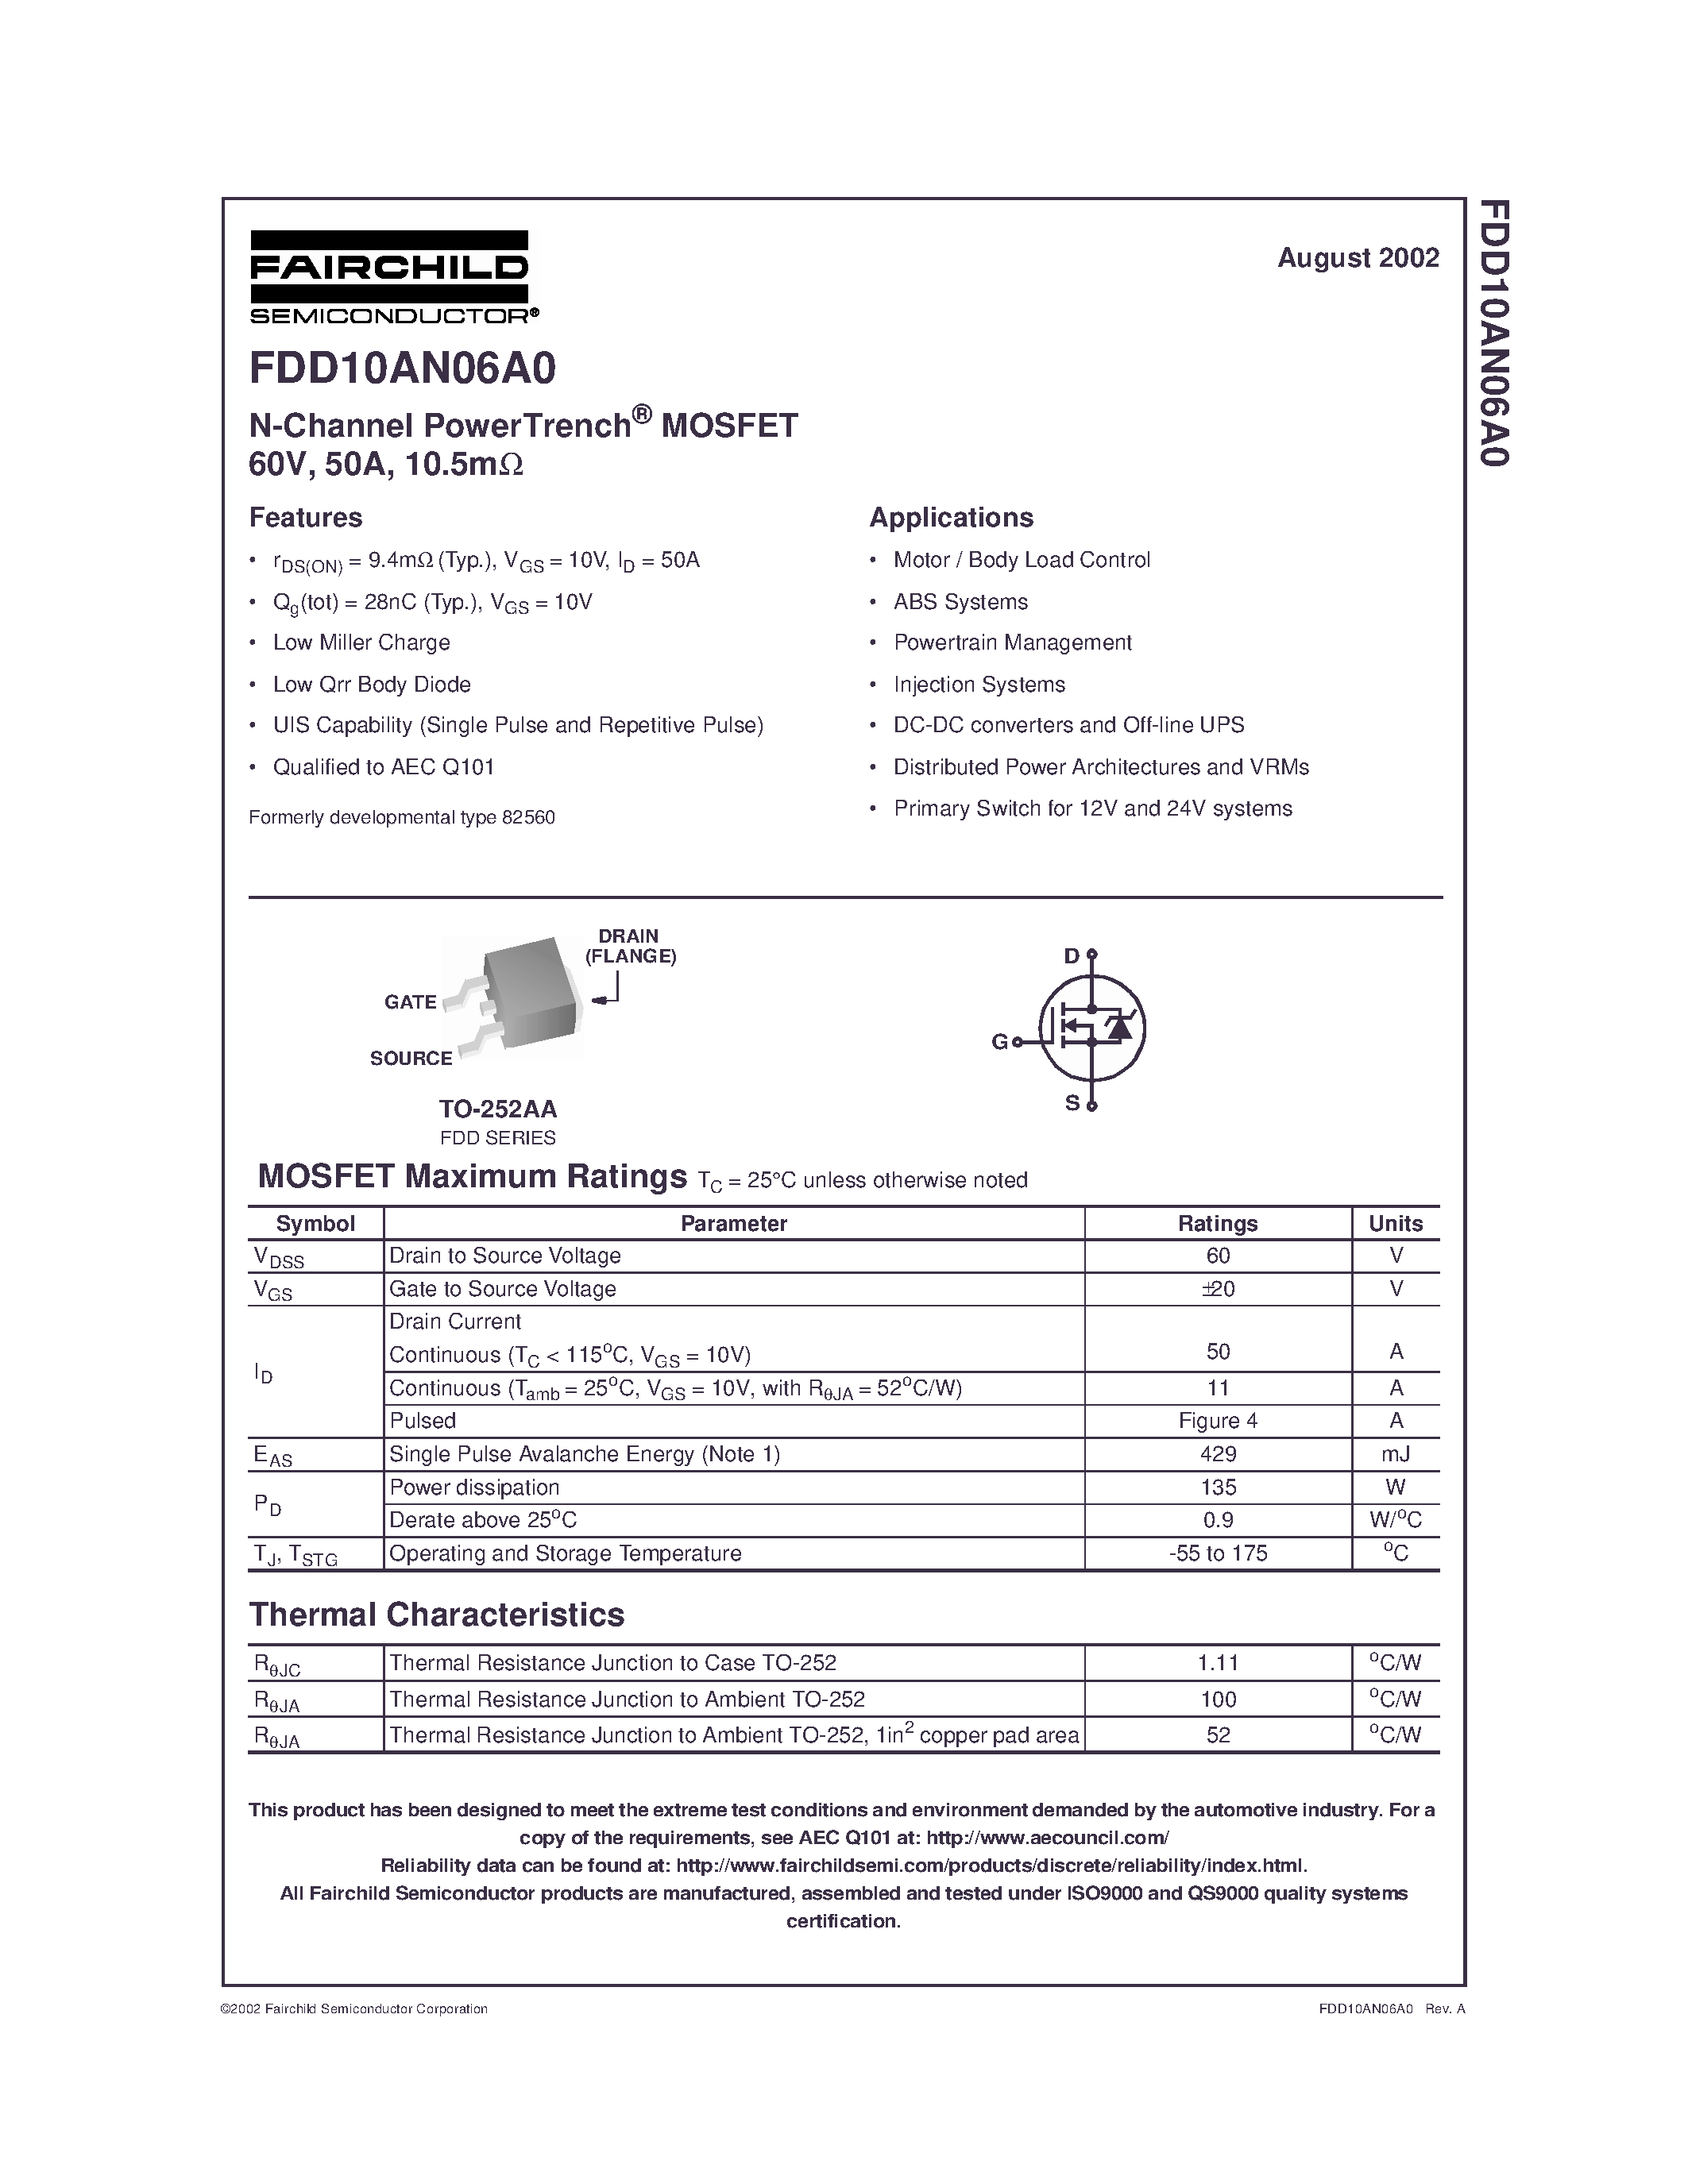 Datasheet FDD10AN06A0 - N-Channel PowerTrench MOSFET 60V/ 50A/ 10.5m page 1